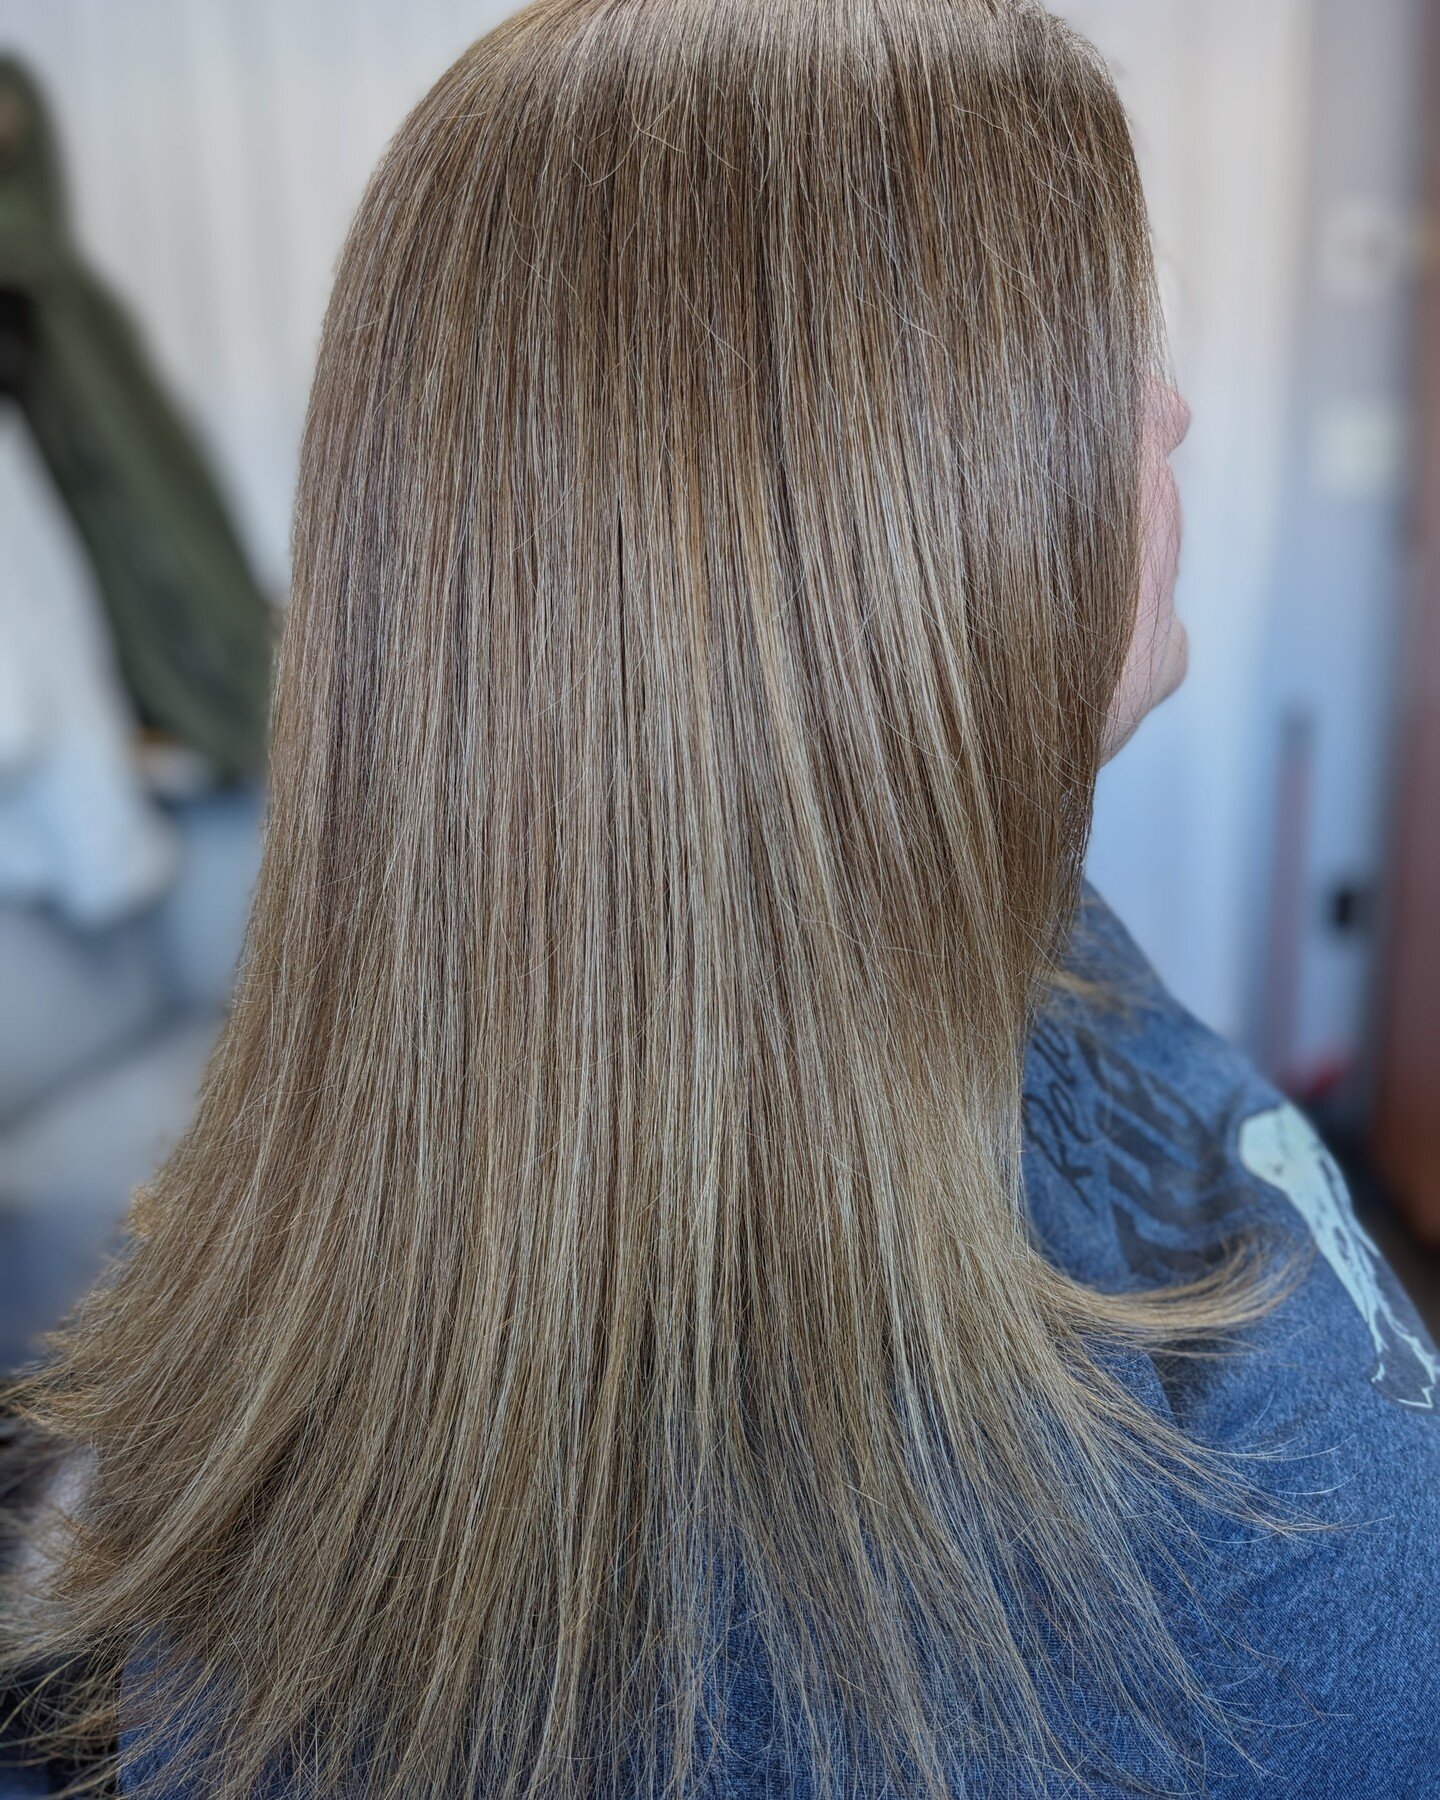 The Advantages Of Low Maintenance Highlights.
In a world where time is of the essence, our low maintenance highlights are a game-changer. Unlike traditional highlighting techniques that require frequent touch-ups, our approach is designed to grow out